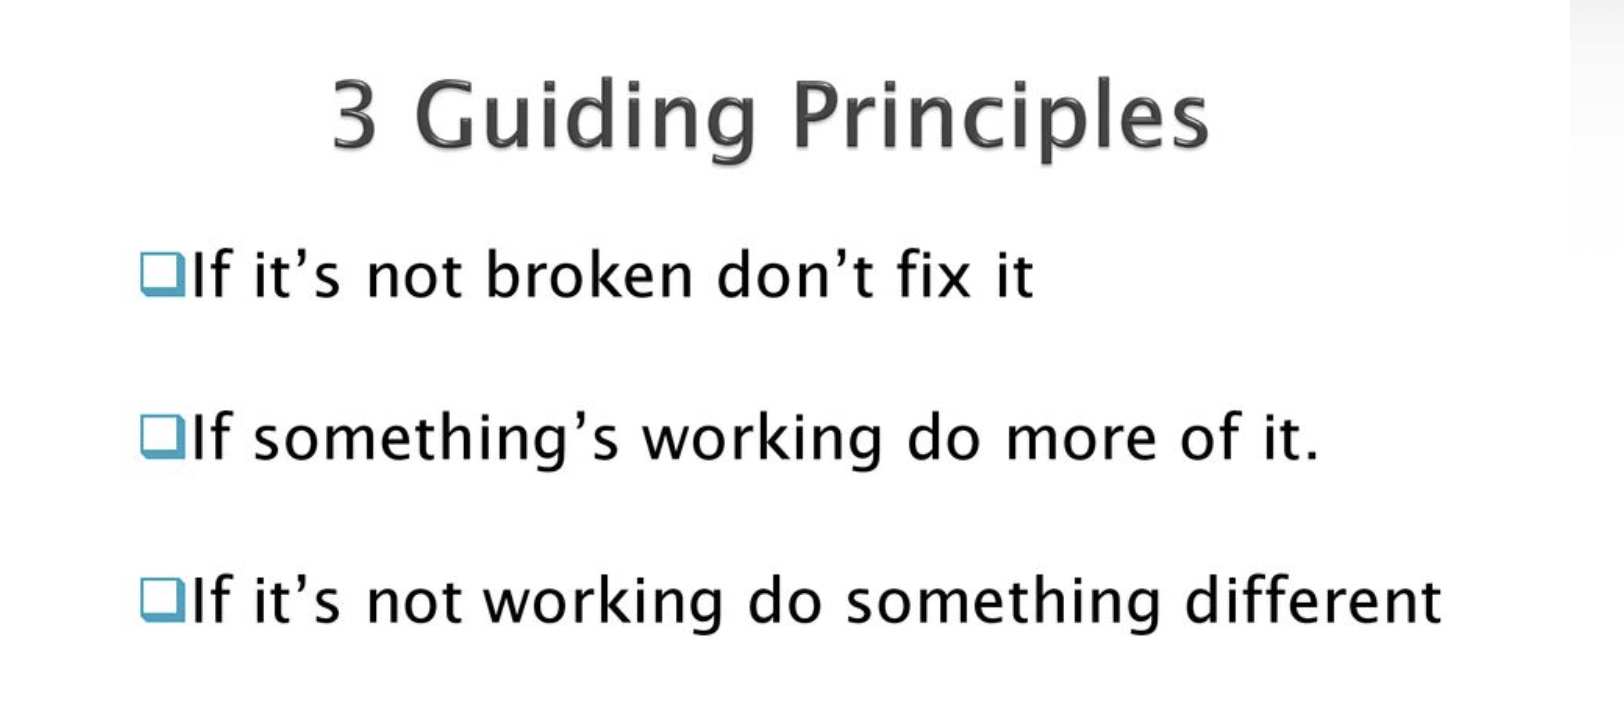 guiding principles in solution oriented approach 